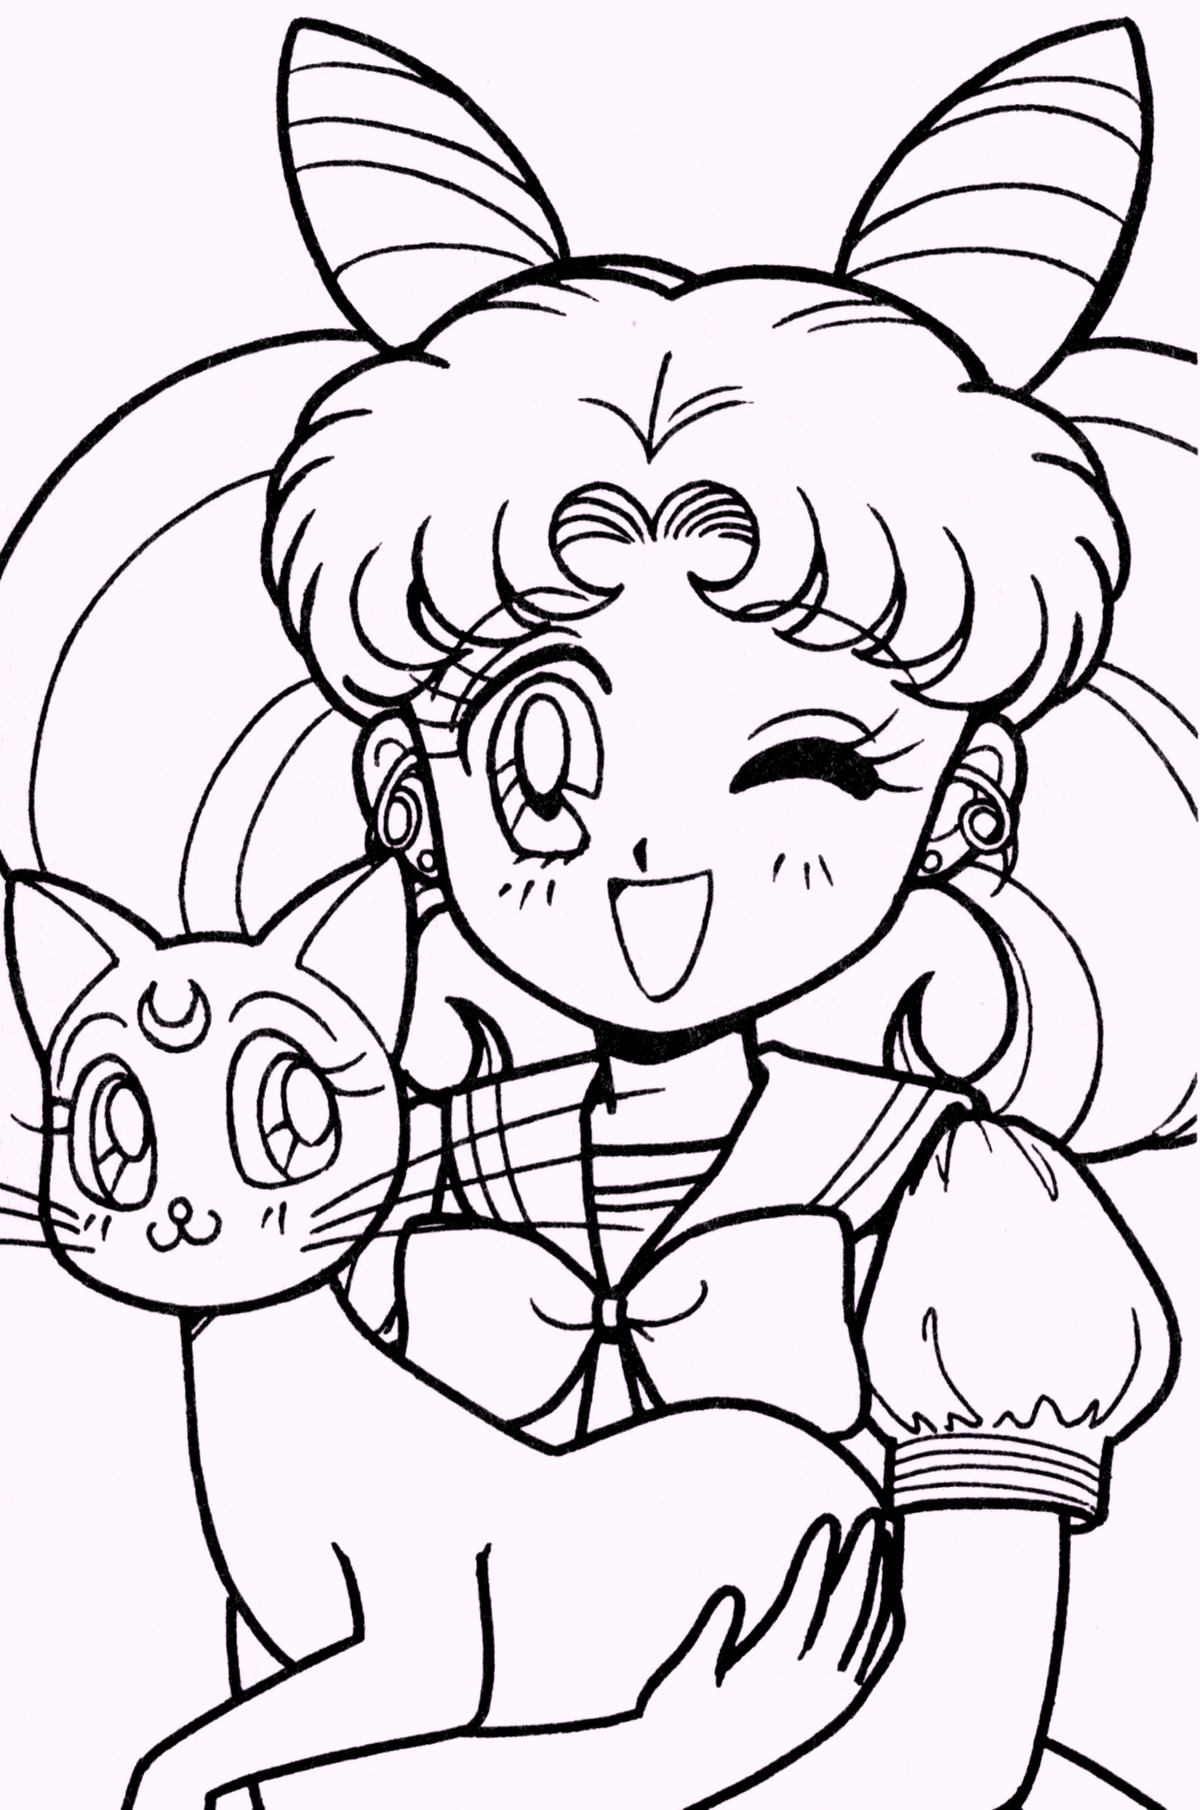 Sailor Moon Coloring Pages for Young Girls Coloring Pages